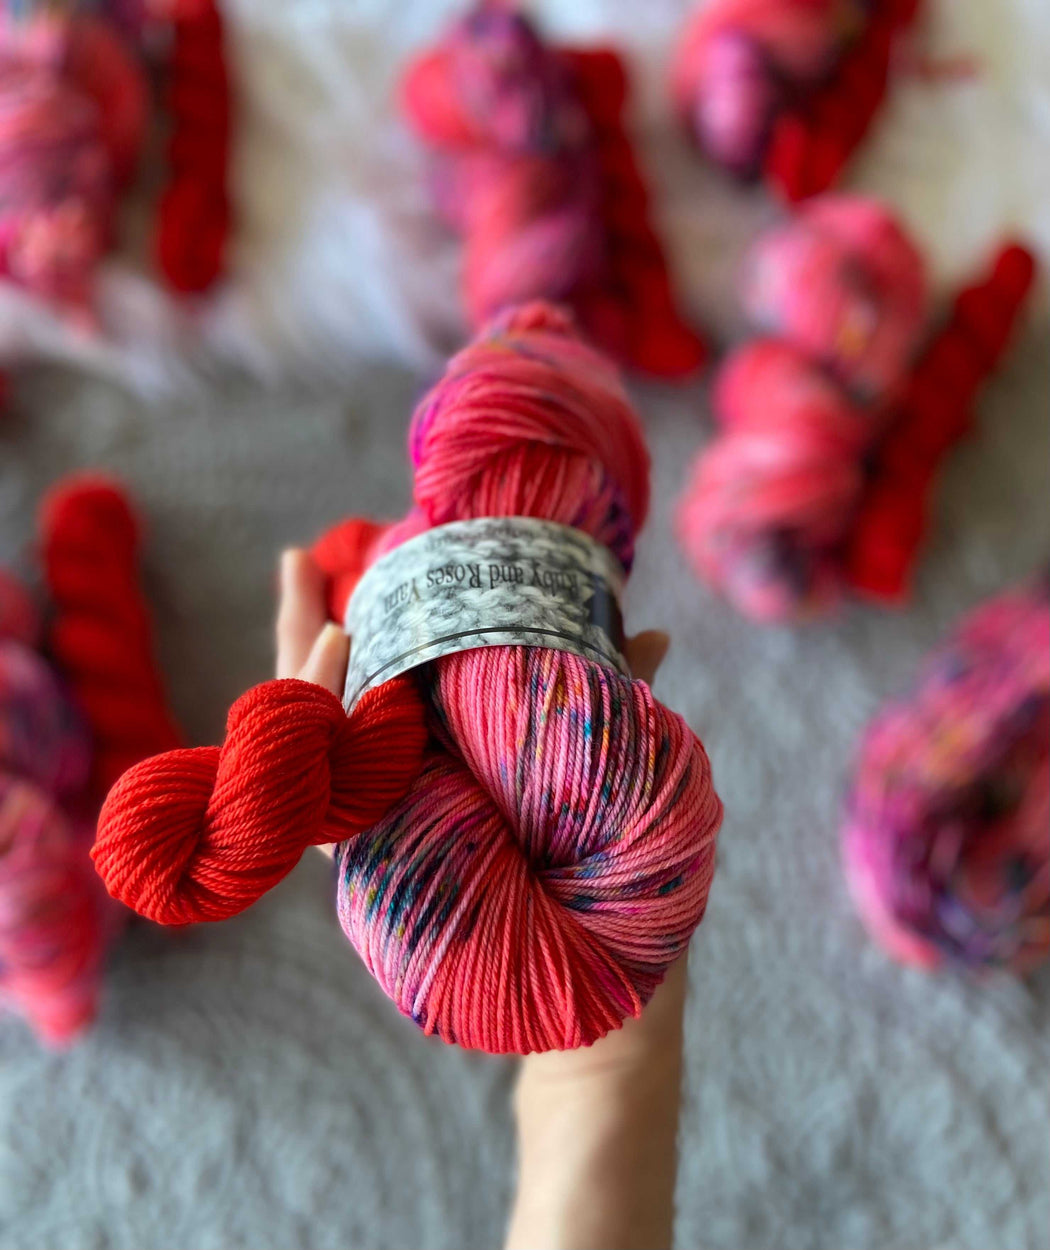 Lovely Aroma /// OOAK Sock Set - Ruby and Roses Yarn